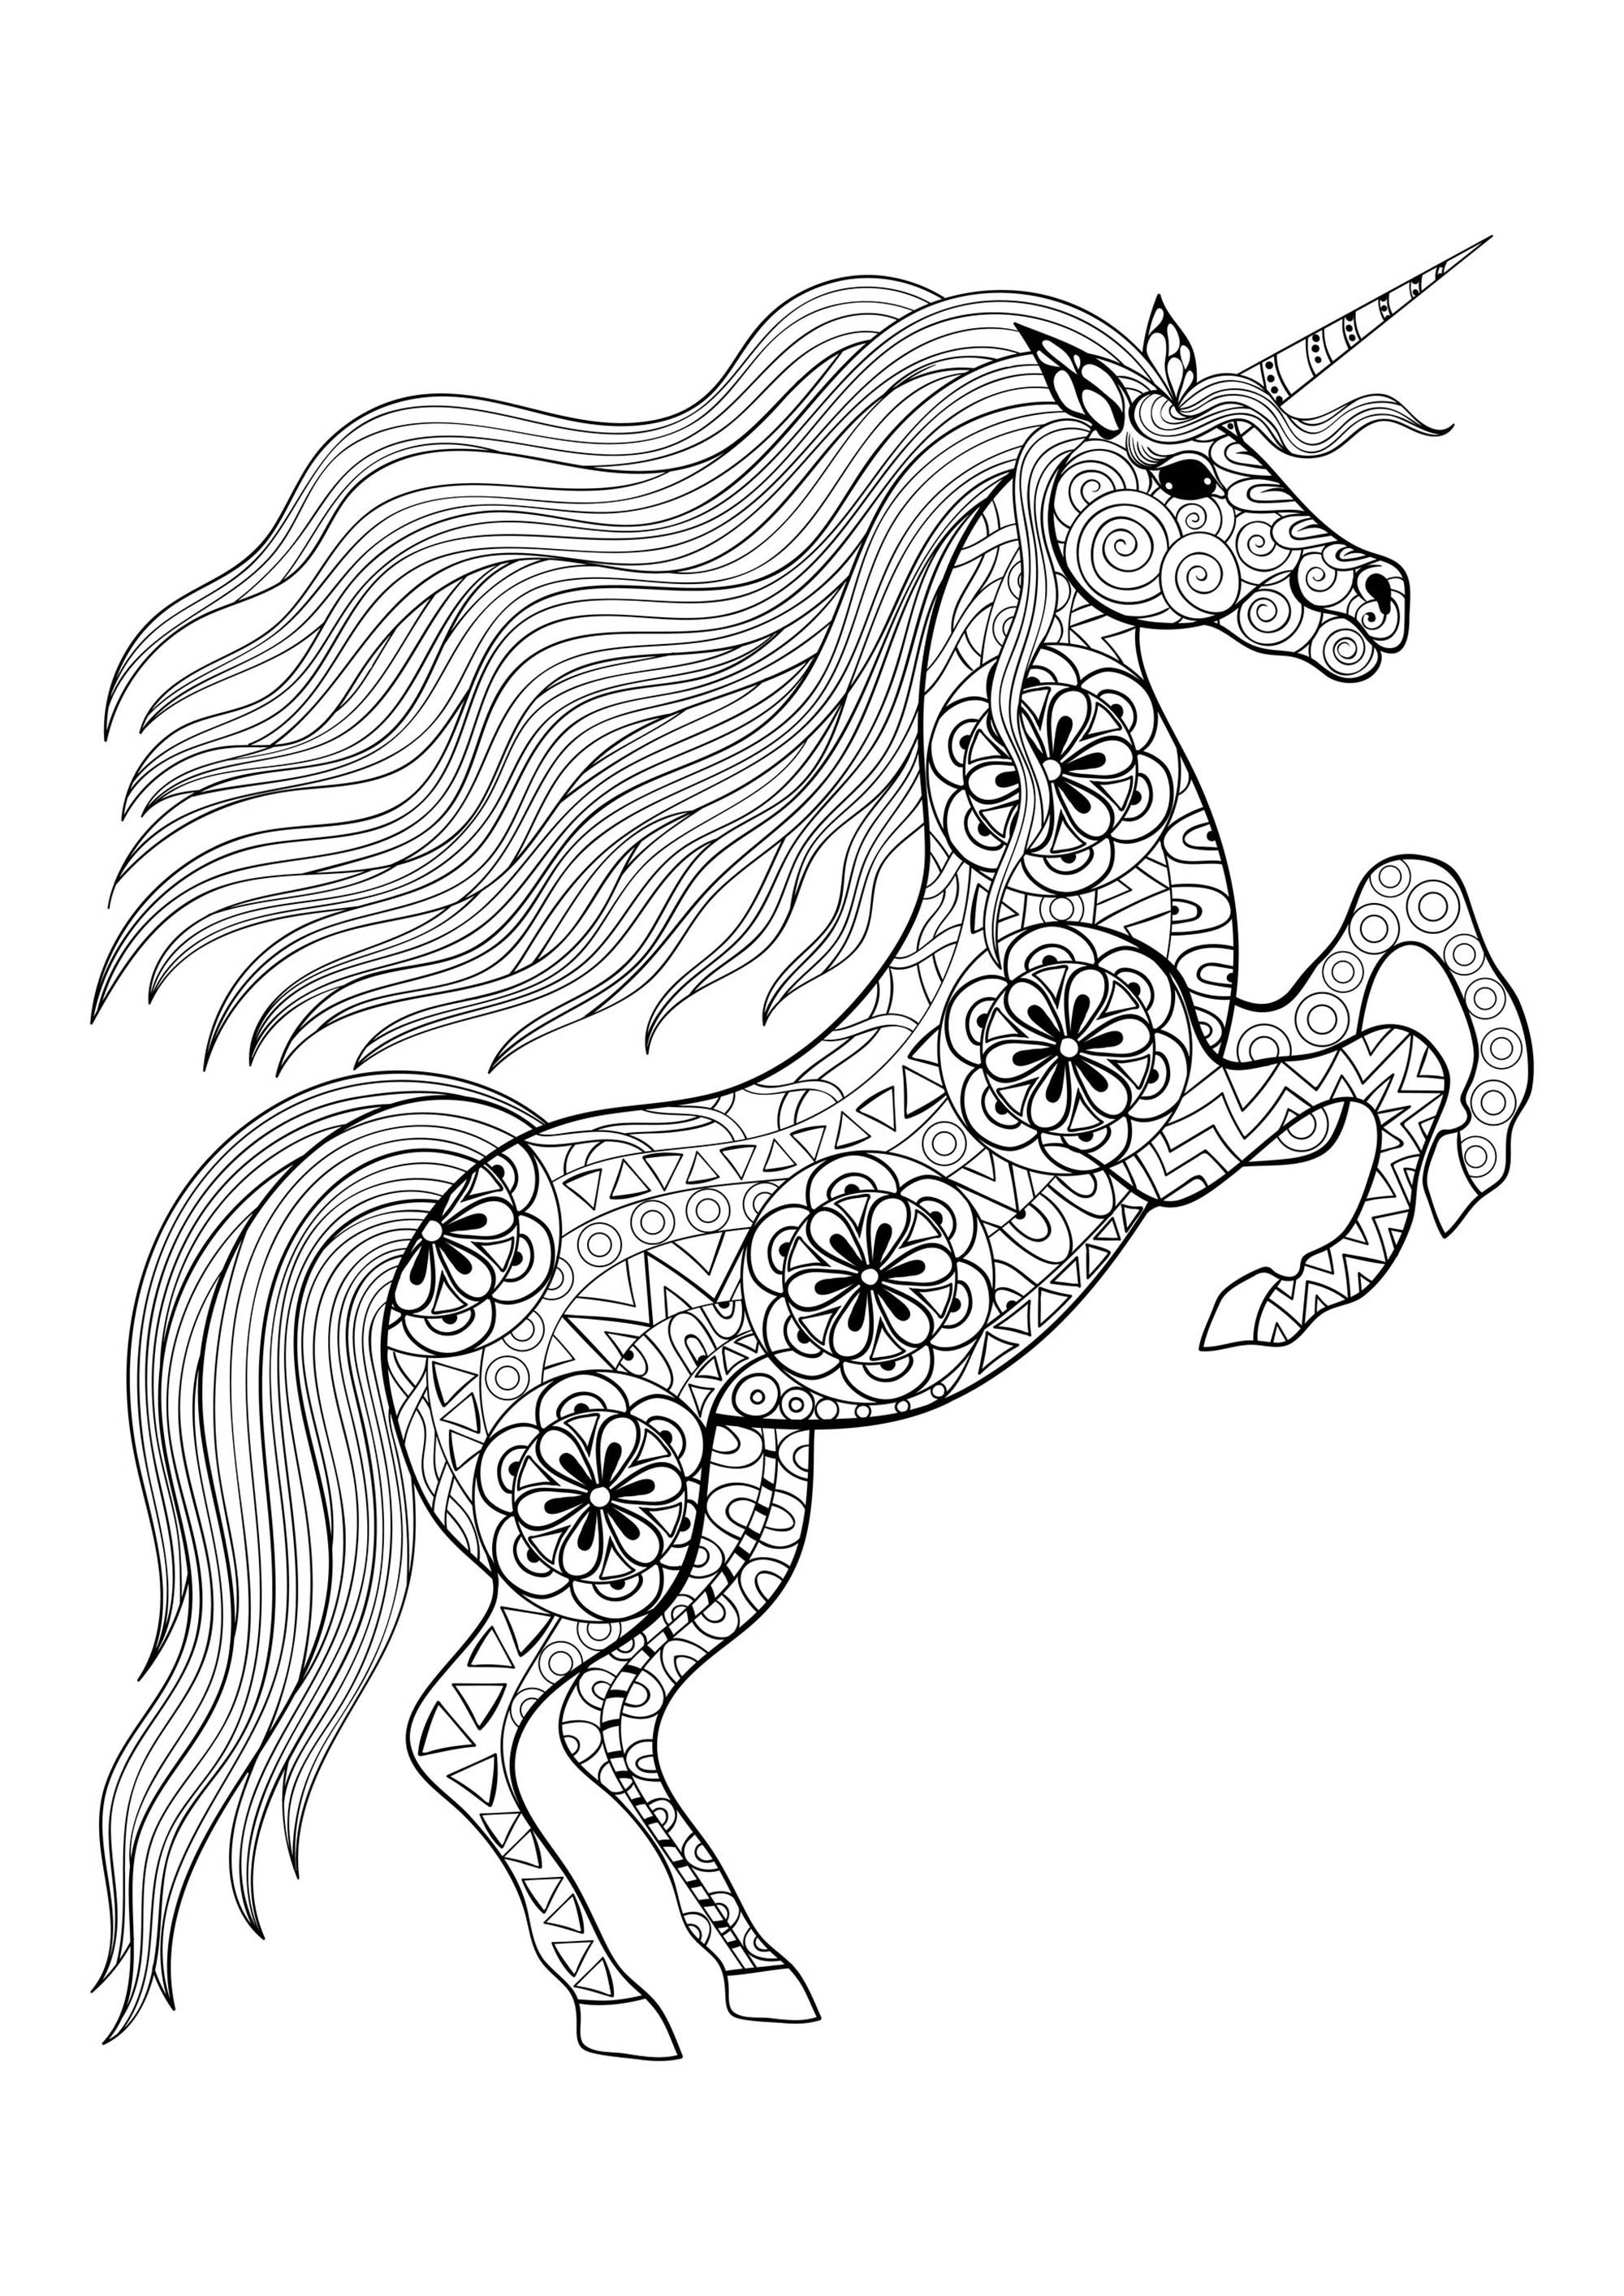 Unicorns to color for children - Unicorns Kids Coloring Pages